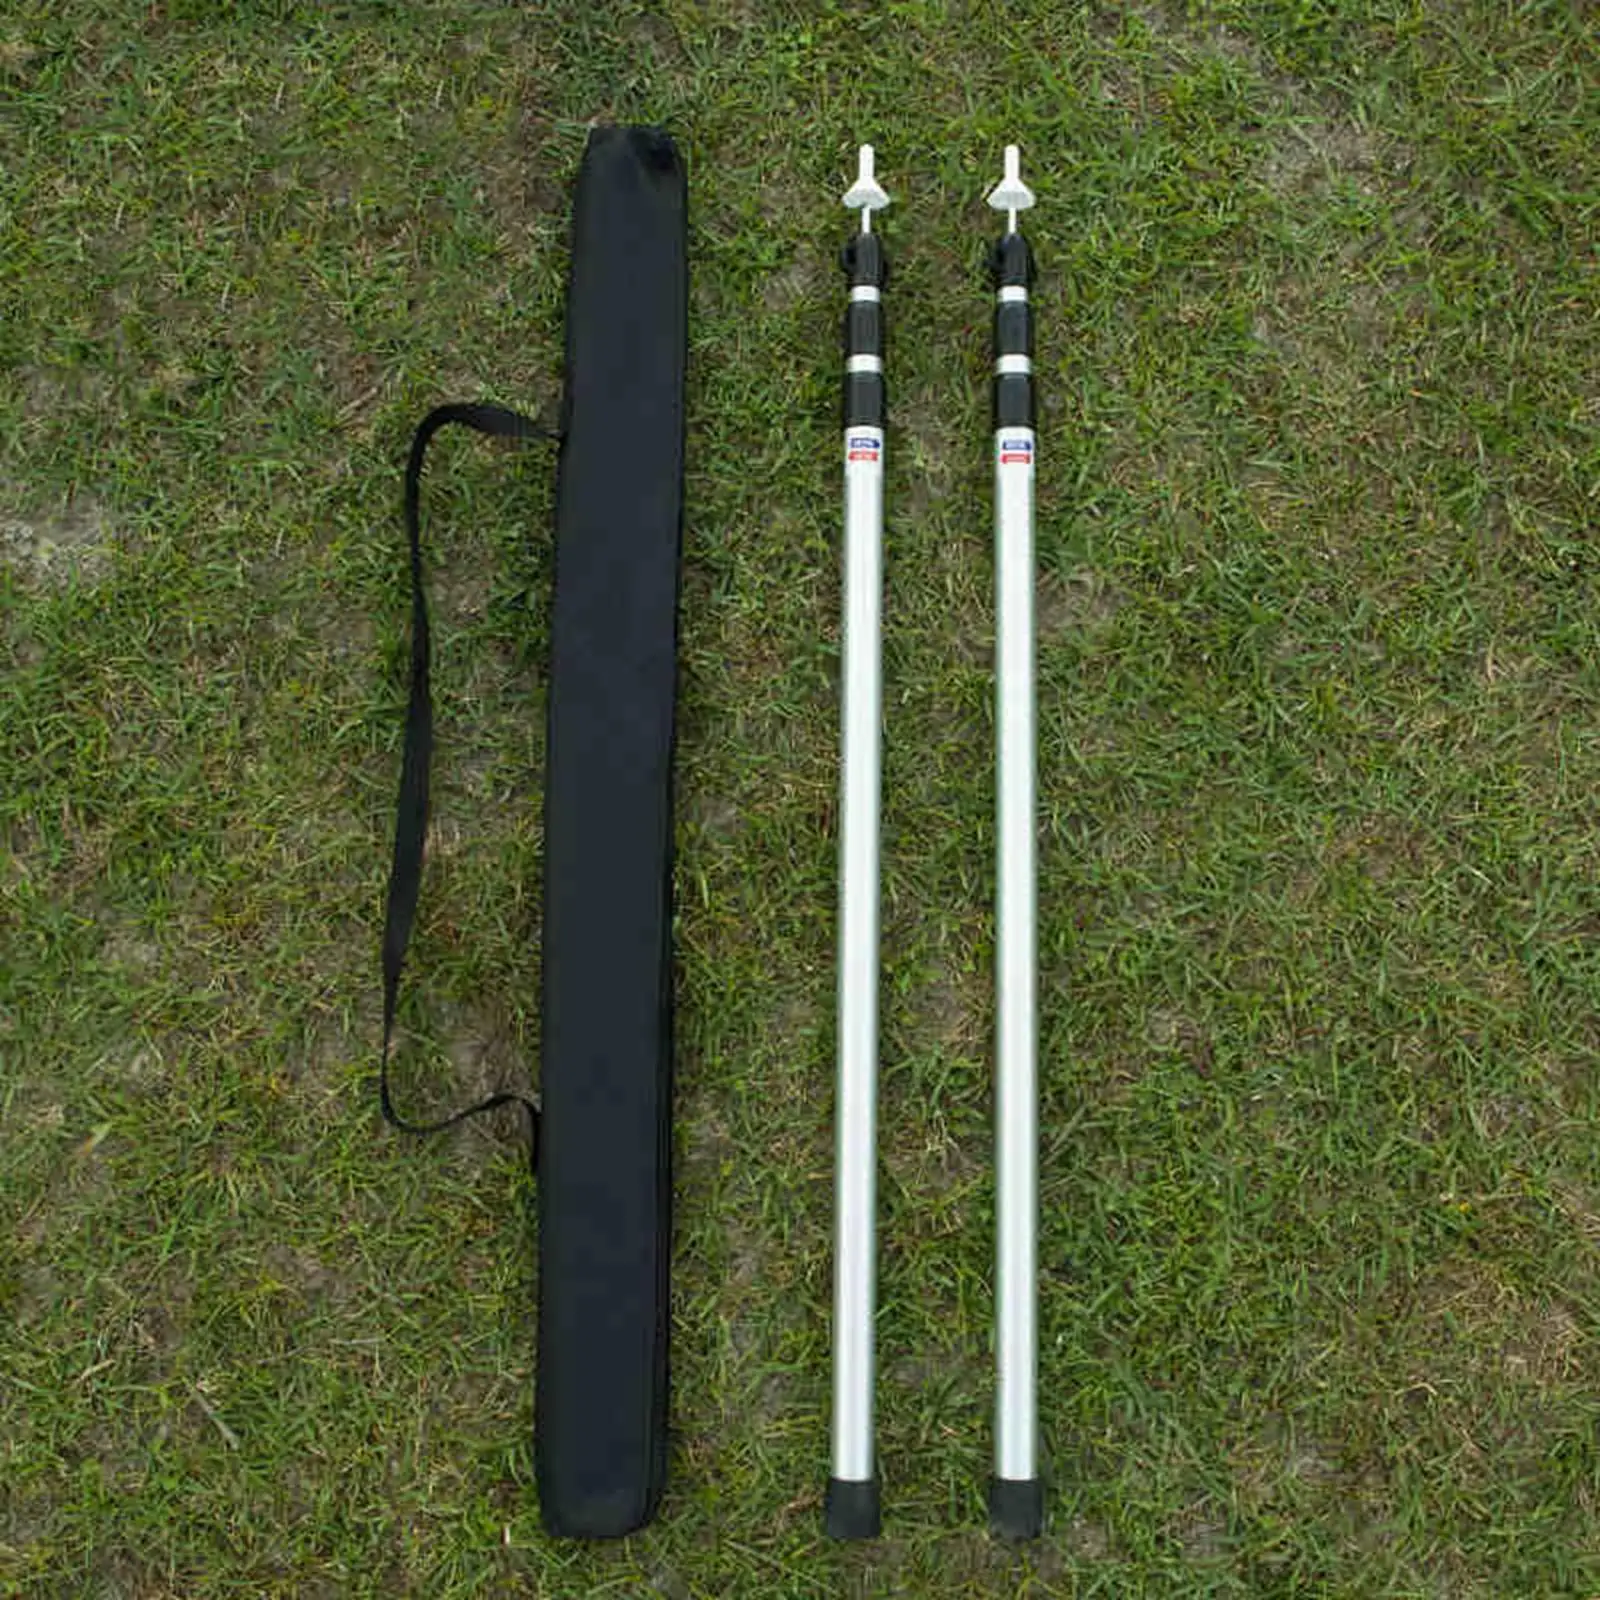 Aluminum Tent Poles 2Pcs Silicone Removable Lightweight Tent Poles for Tarp Pole Tent Tarp Poles Adjustable for Hiking Camping,